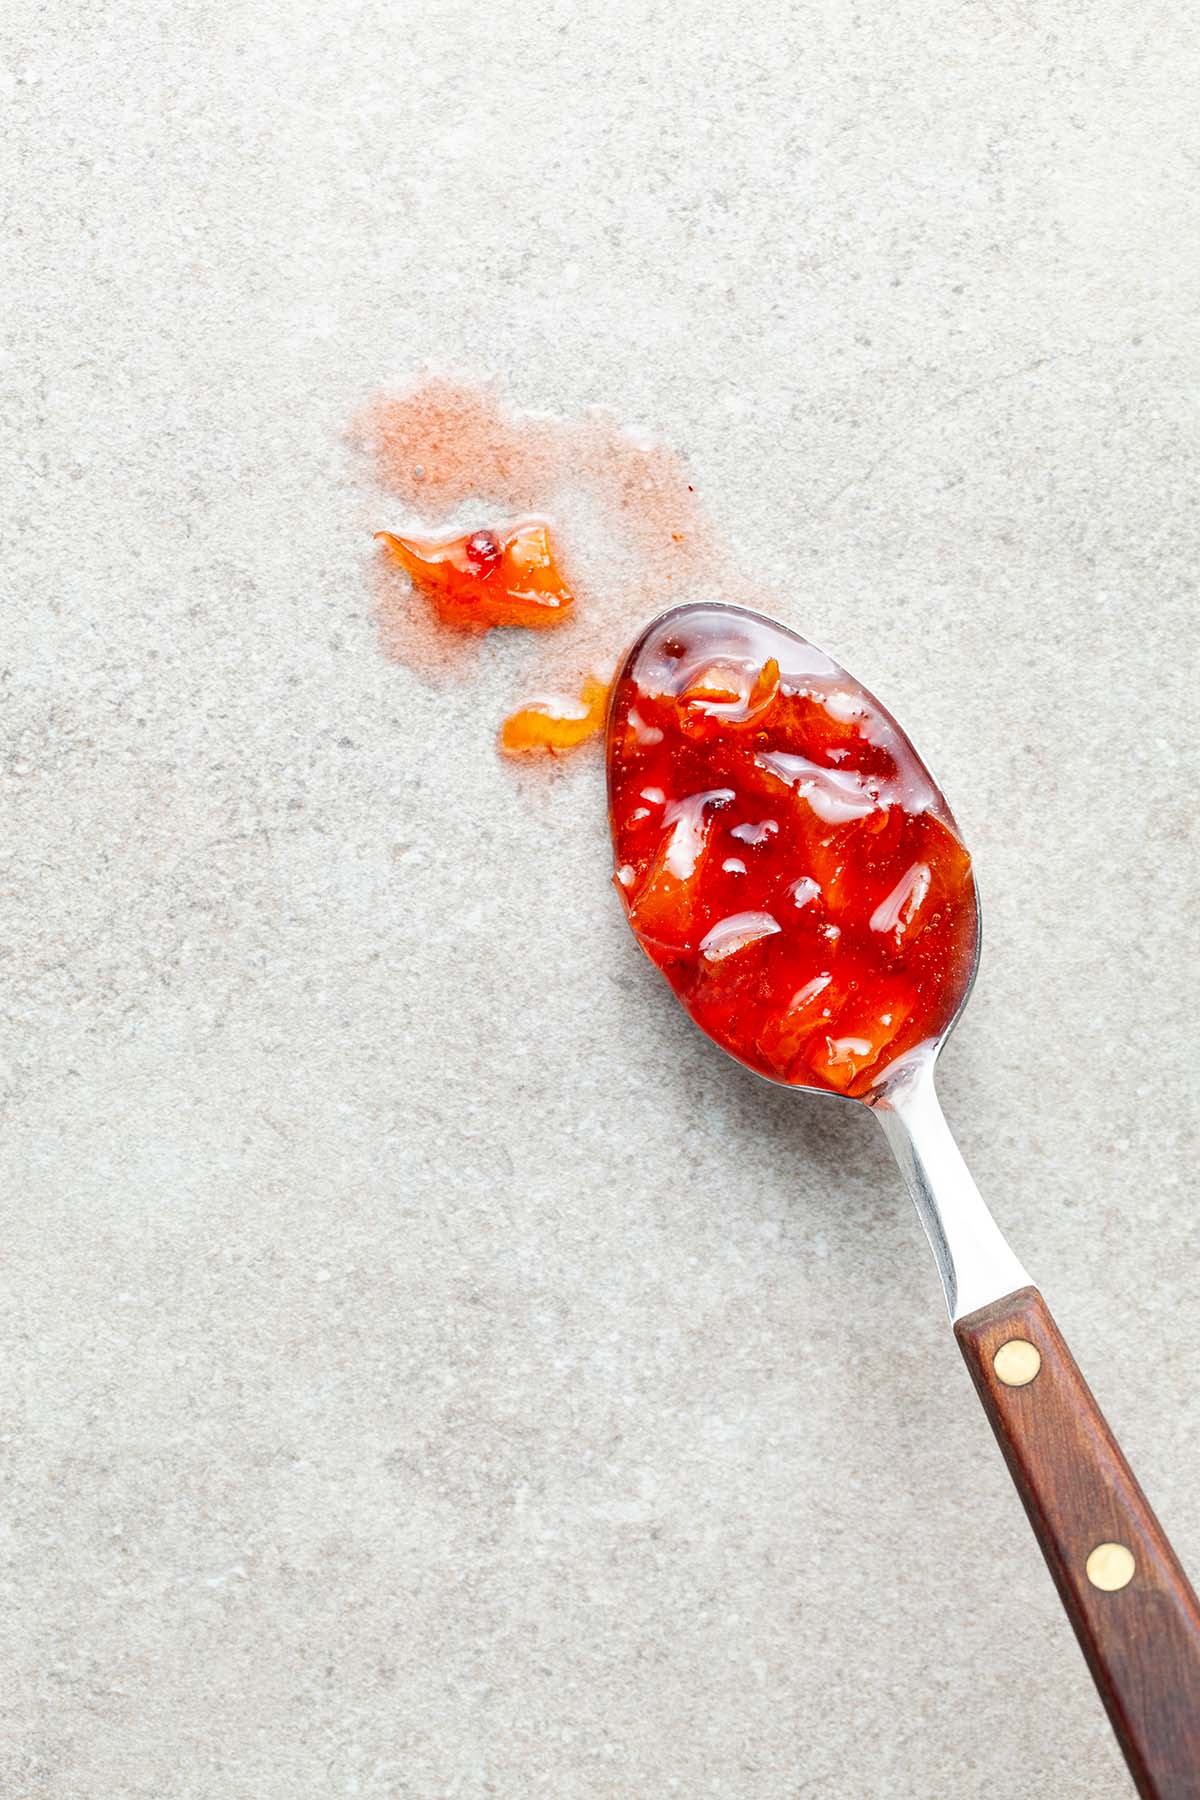 Maple peach whisky jam on a spoon laid out on a stone surface.